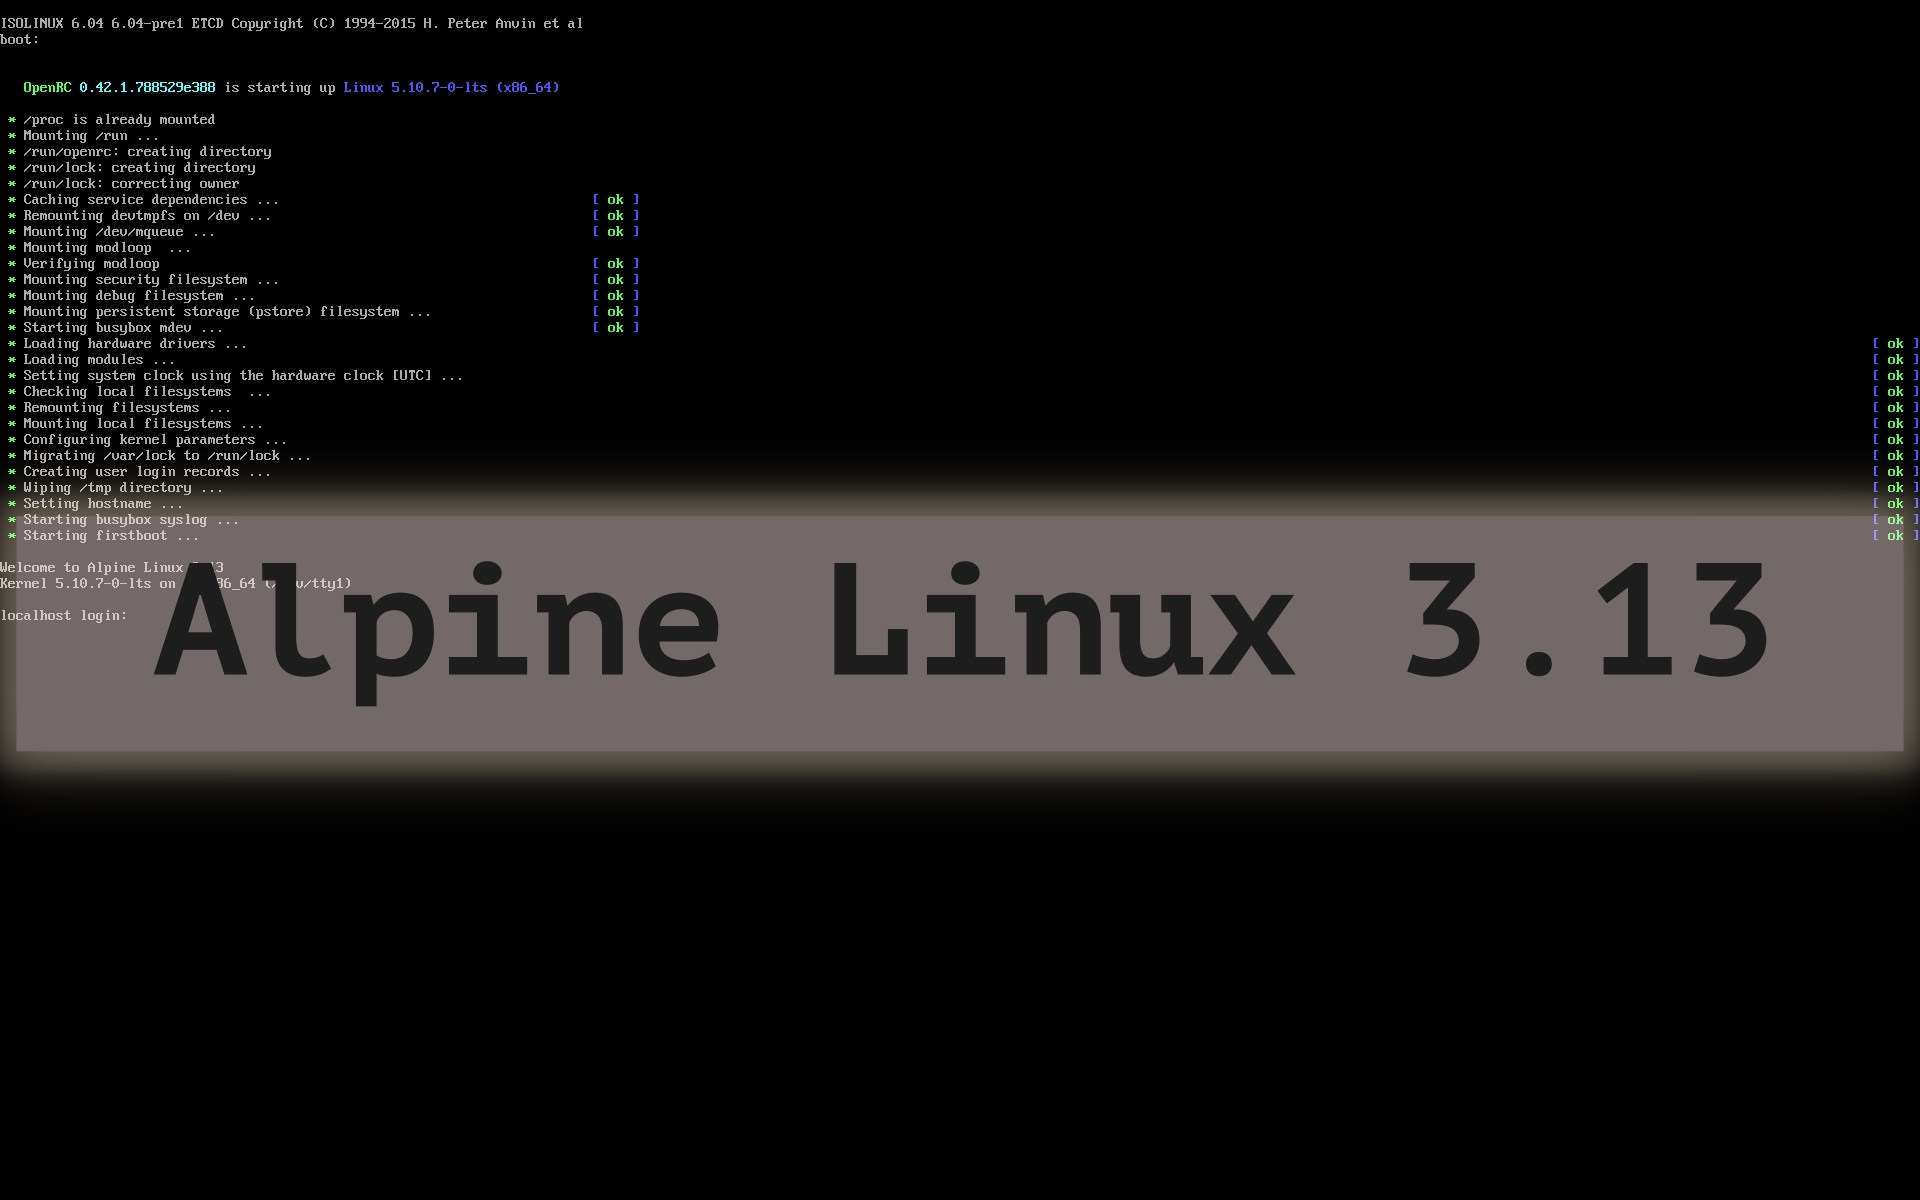 Alpine Linux 3.13 Released with Official Cloud Images, Linux 5.10 LTS, and PHP 8.0